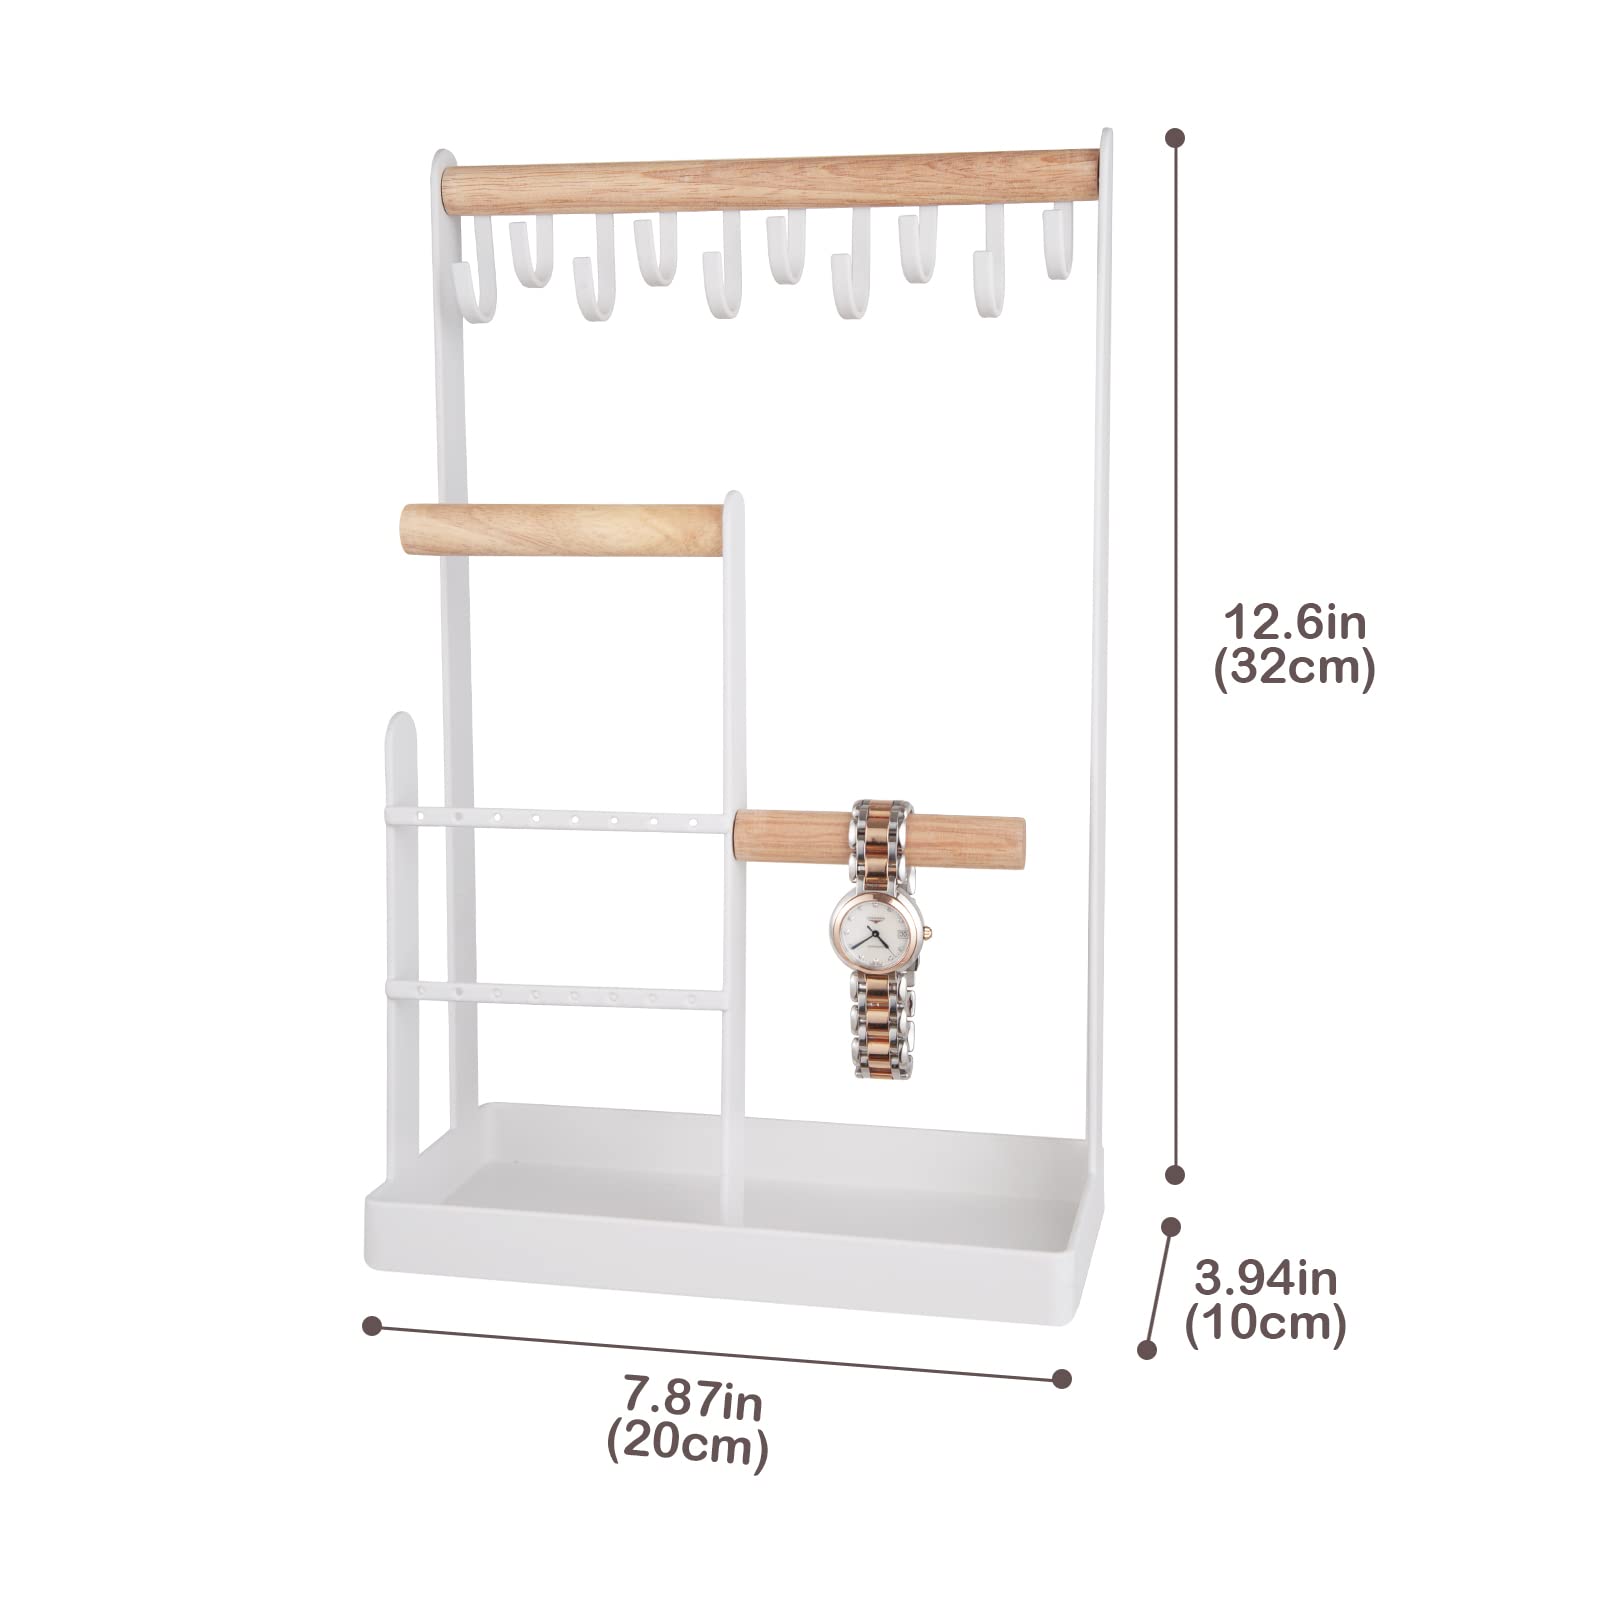 ProCase Jewelry Organizer Stand Necklace Holder, 4-Tier Tower Rack with Earring Tray and Holes, 10 Hooks Hanging Storage Tree Display for Bracelets Watches Rings -White